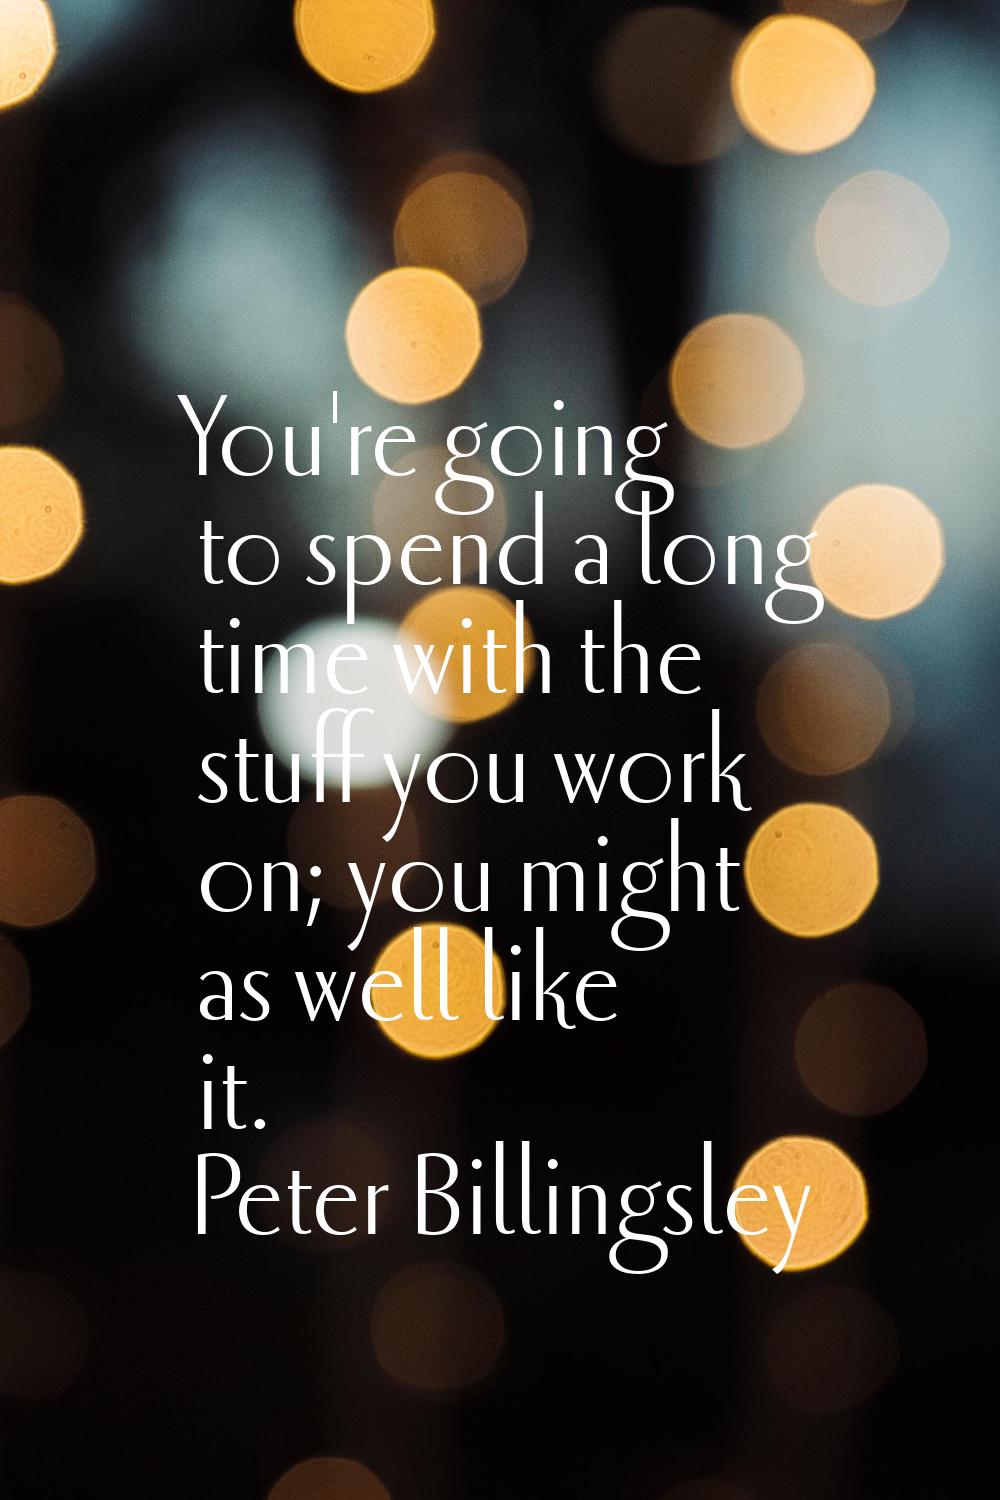 You're going to spend a long time with the stuff you work on; you might as well like it.